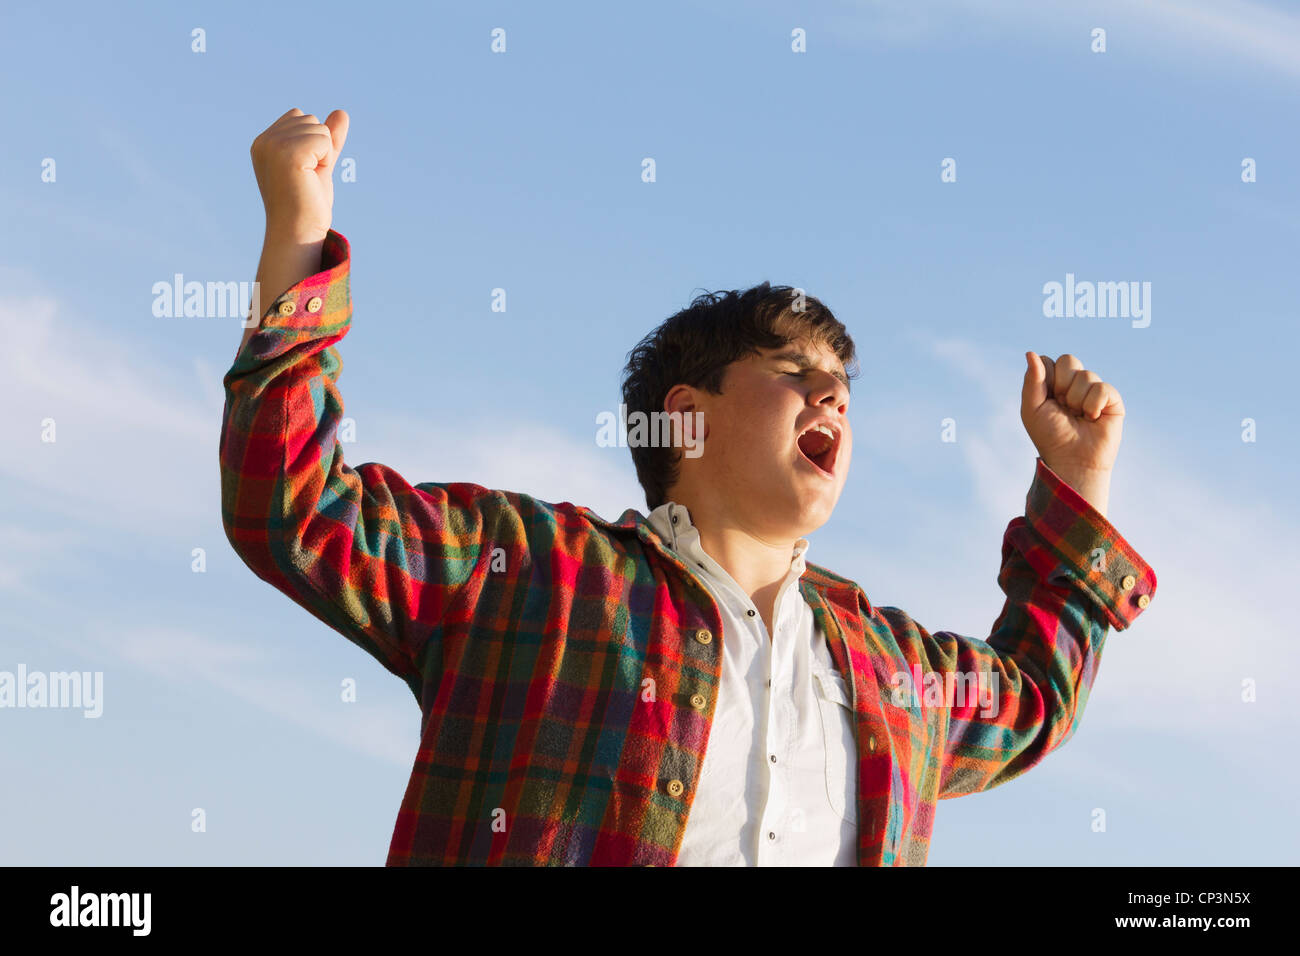 Cry out for joy - young teenage boy with raised arms feeling free. Sunny summer outdoor shot against a blue sky. Stock Photo